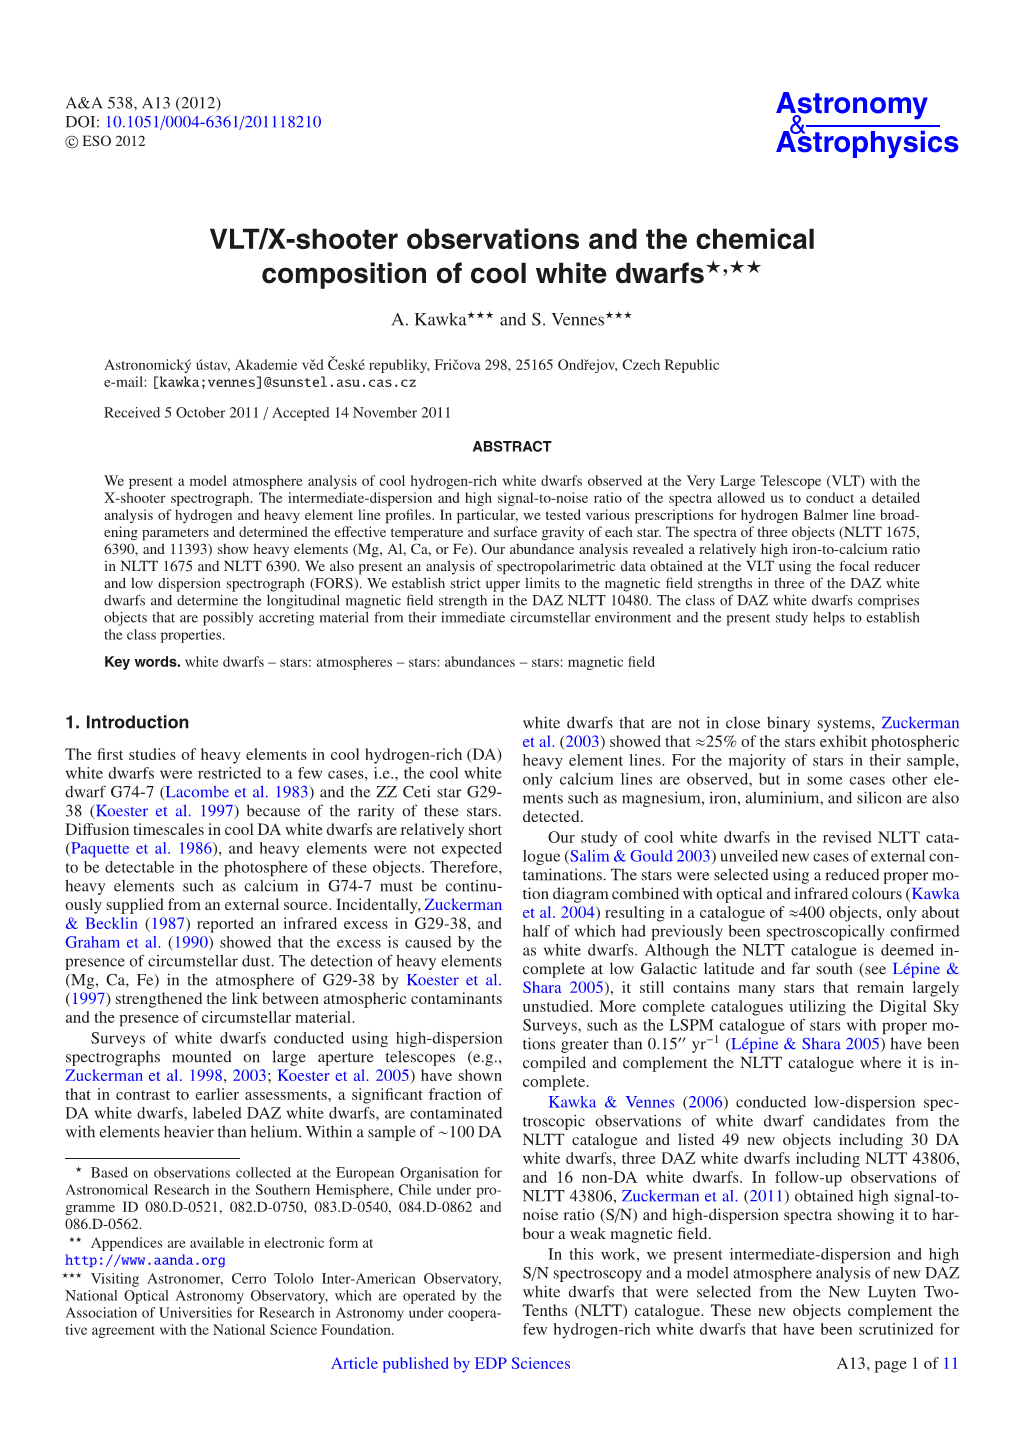 VLT/X-Shooter Observations and the Chemical Composition of Cool White Dwarfs�,